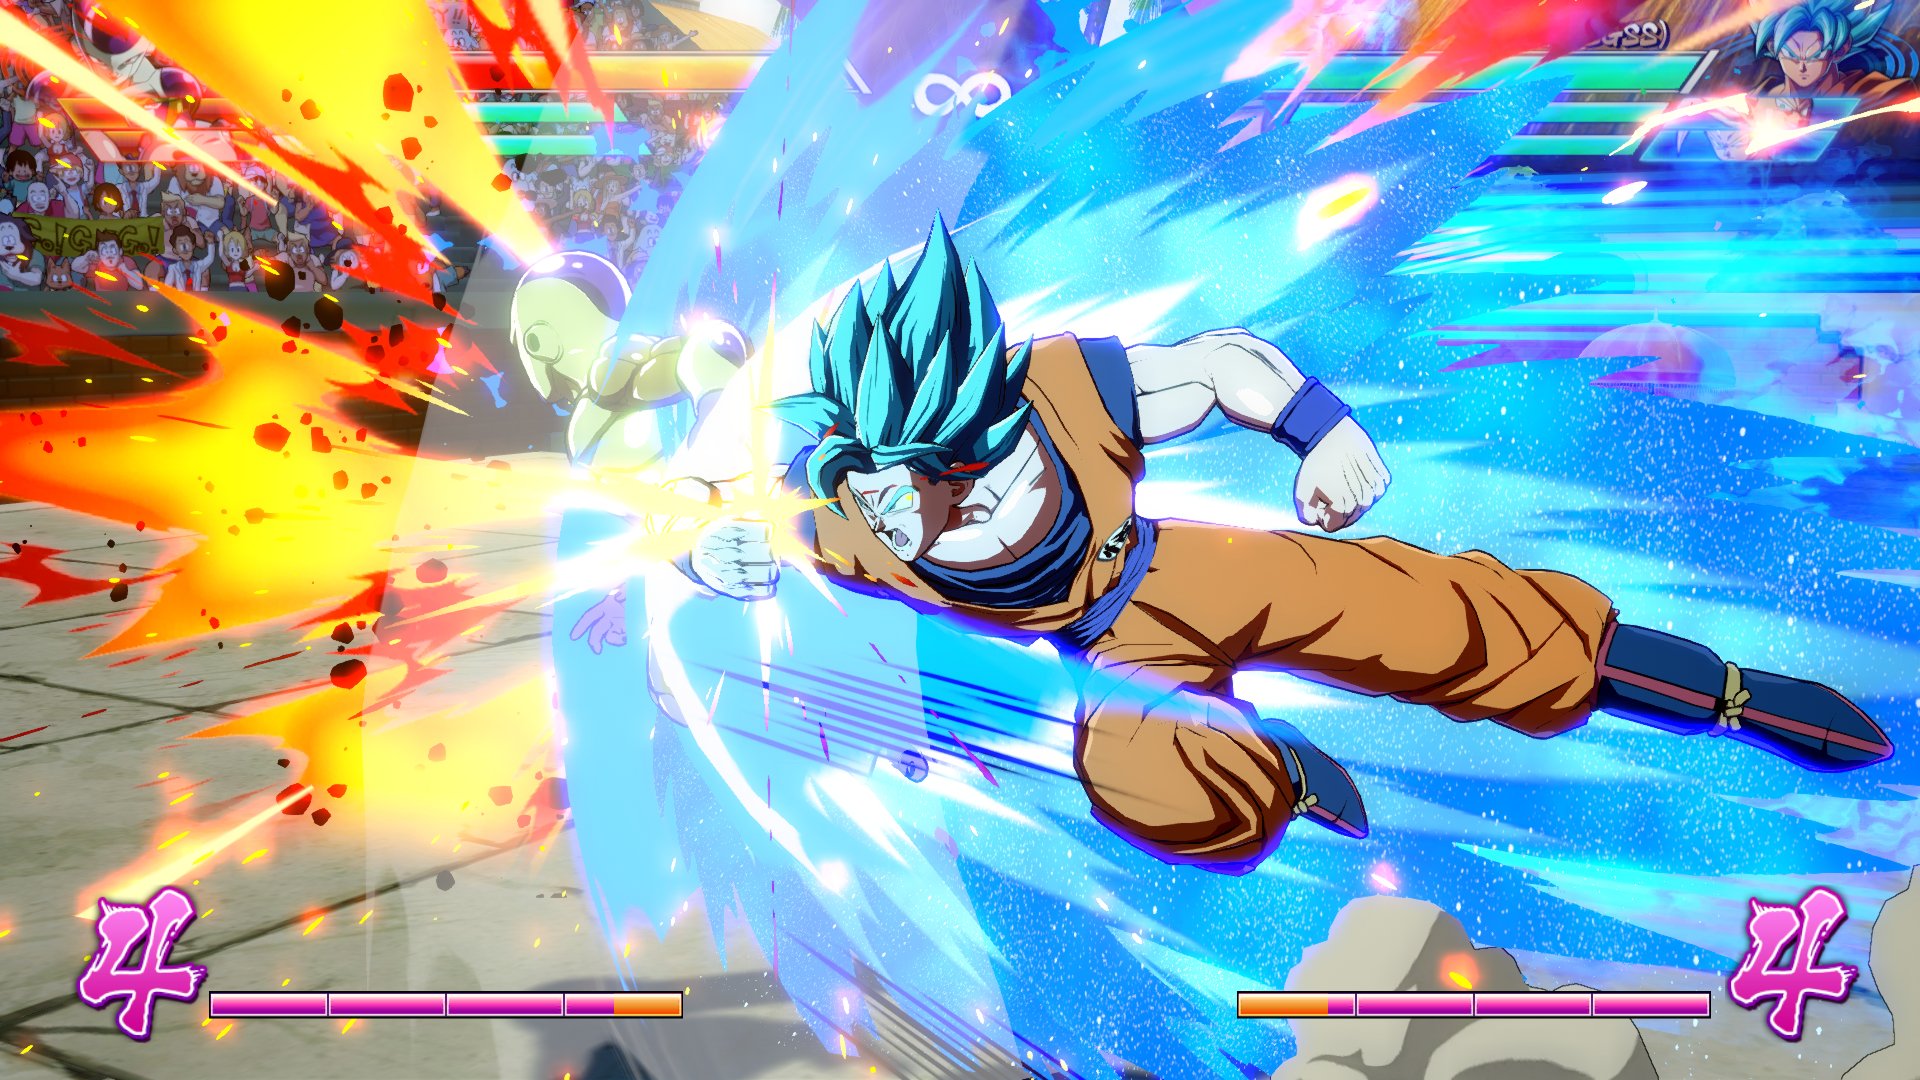 game-release-dates-2018-dragon-ball-fighterz